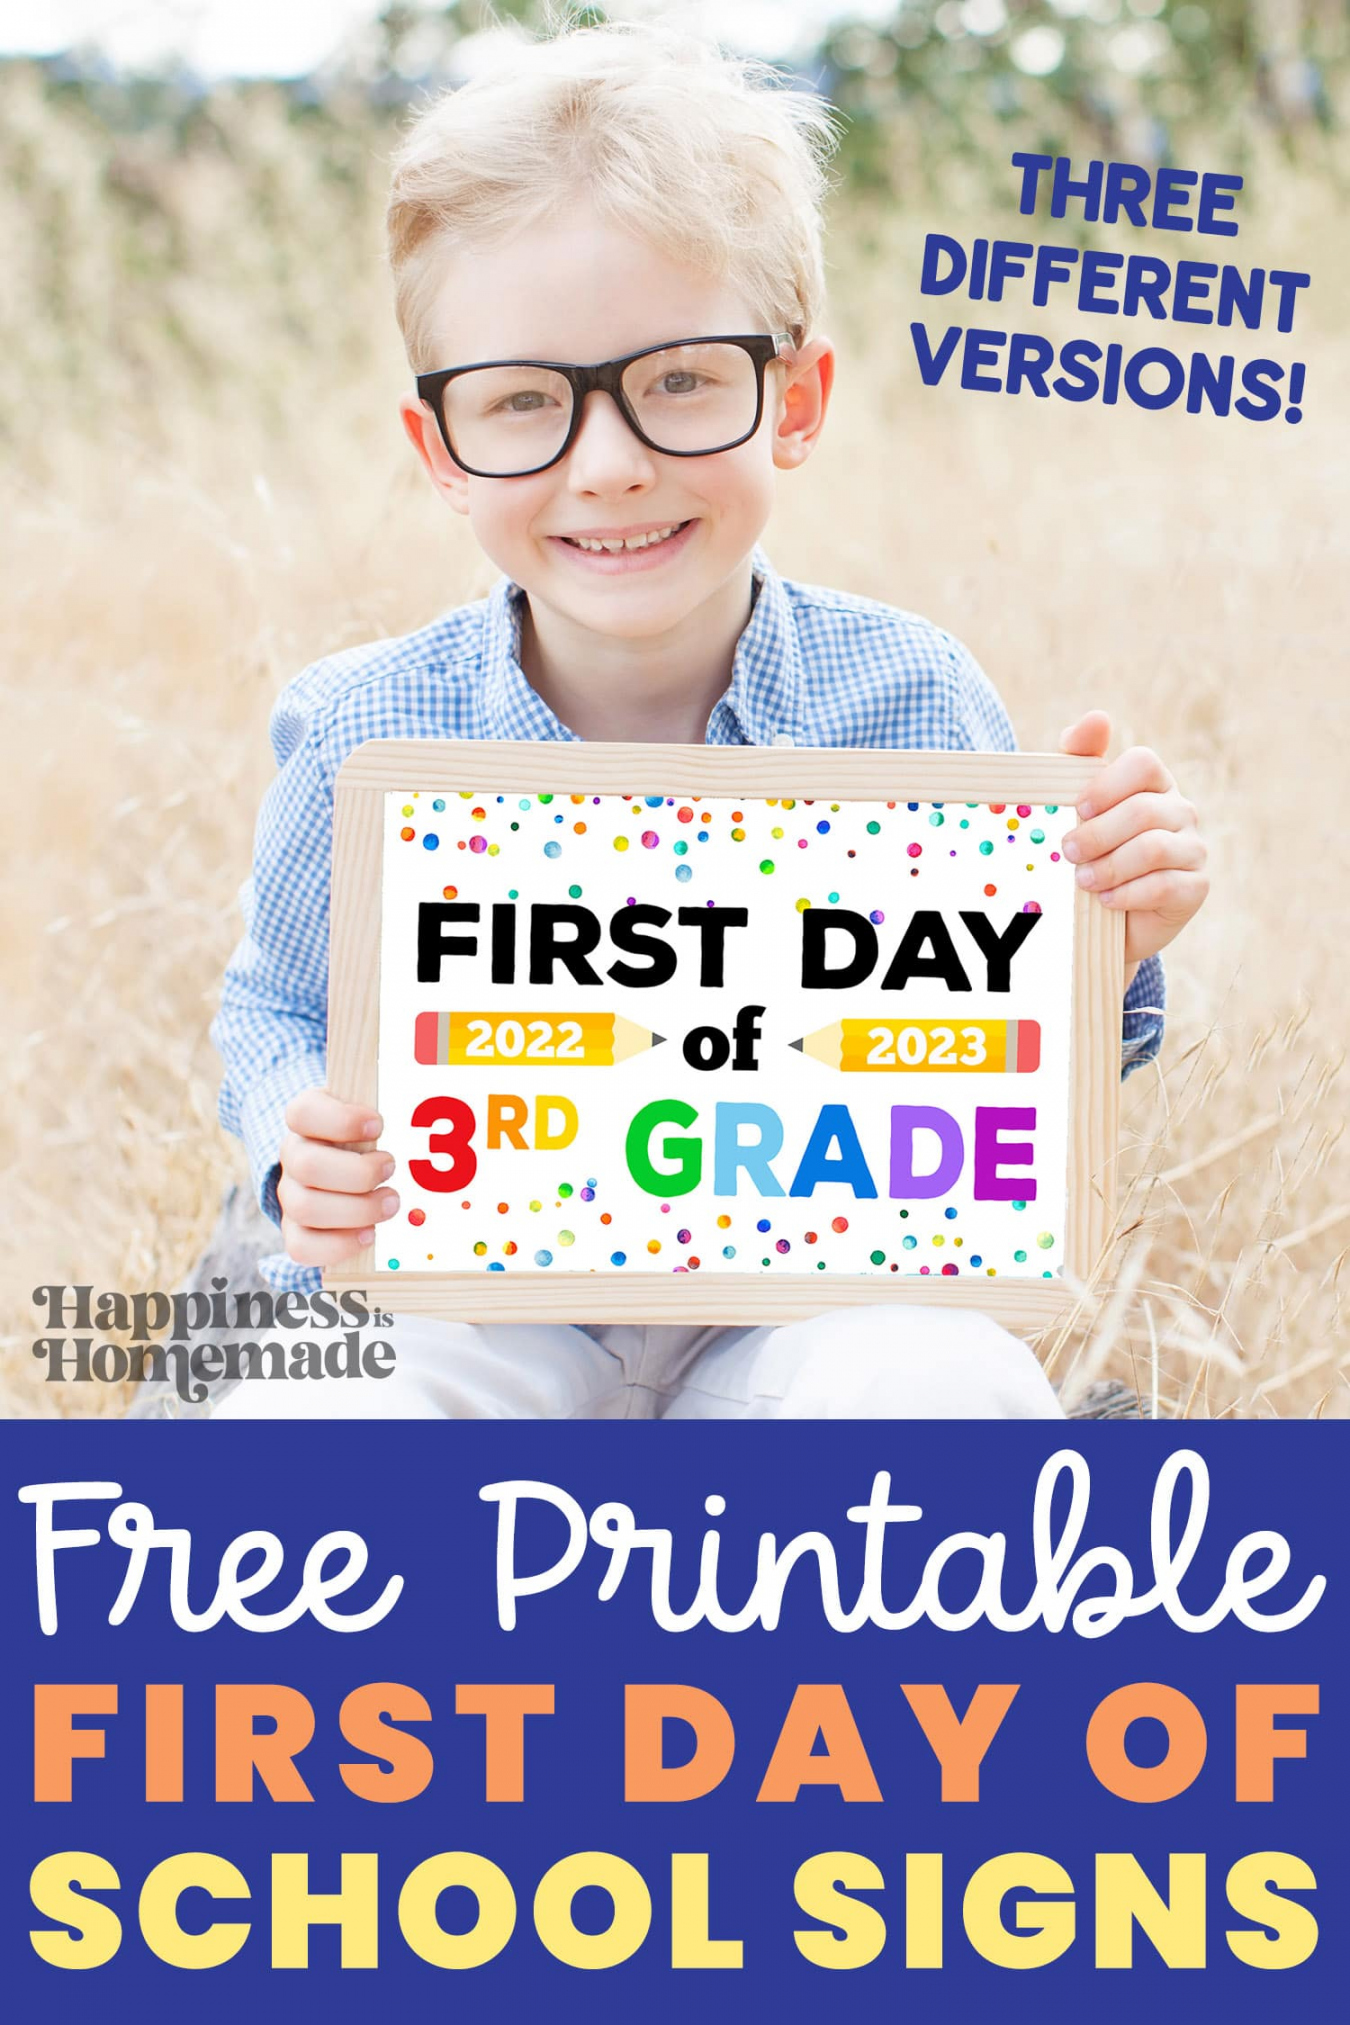 First Day of School Free Printables - Printable - Free Printable First Day of School Signs - - Happiness is